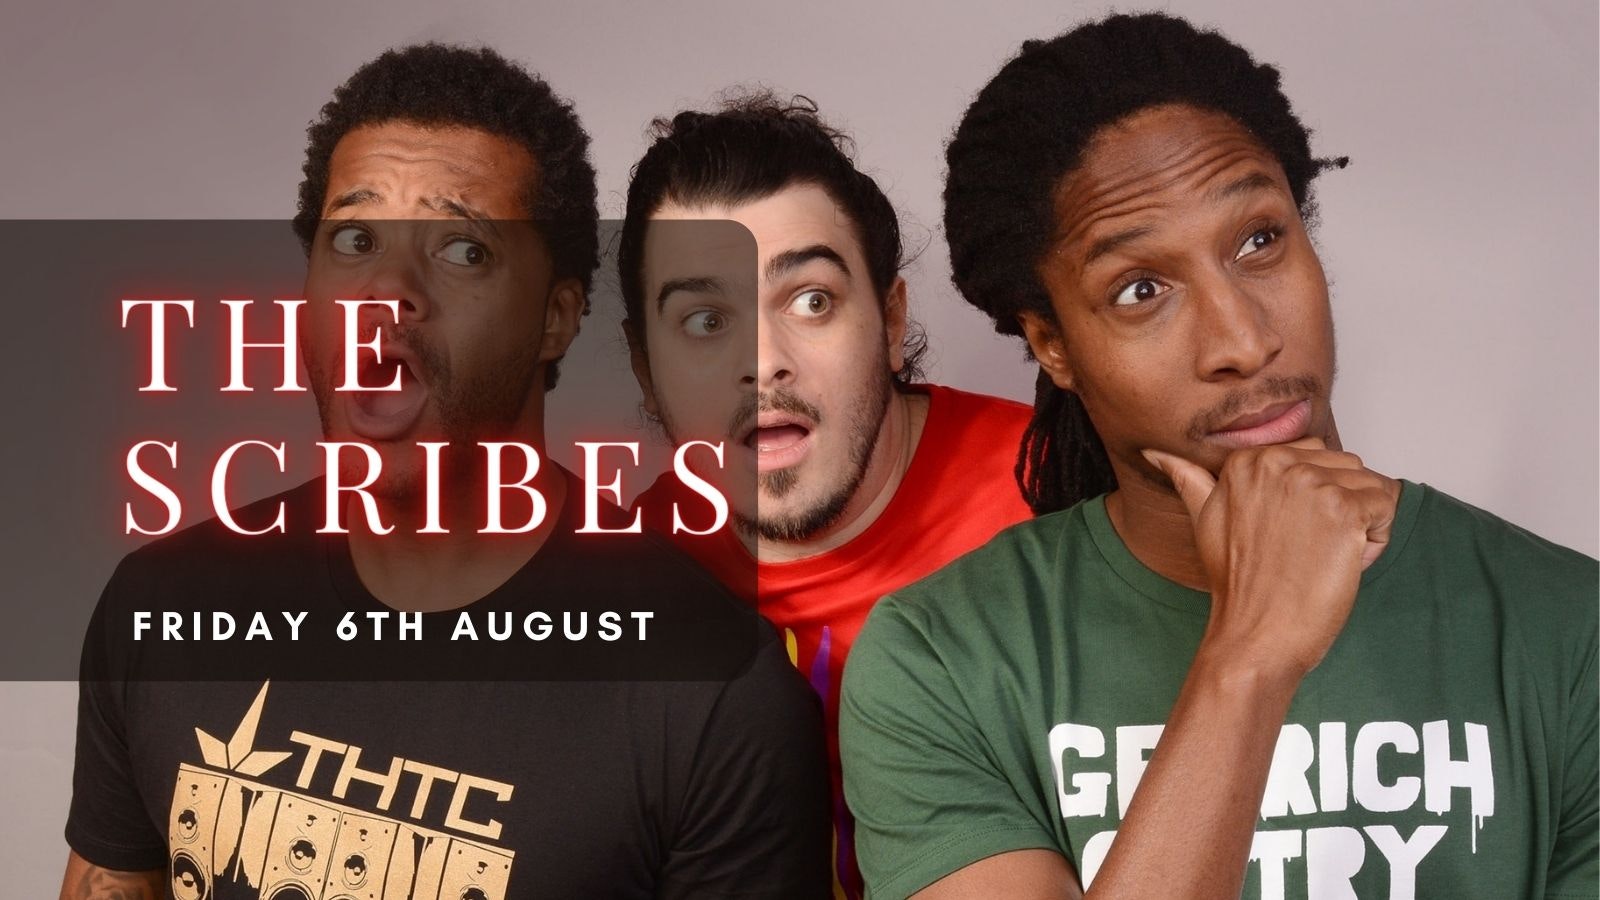 THE SCRIBES | Plymouth, Annabel’s Cabaret & Discotheque